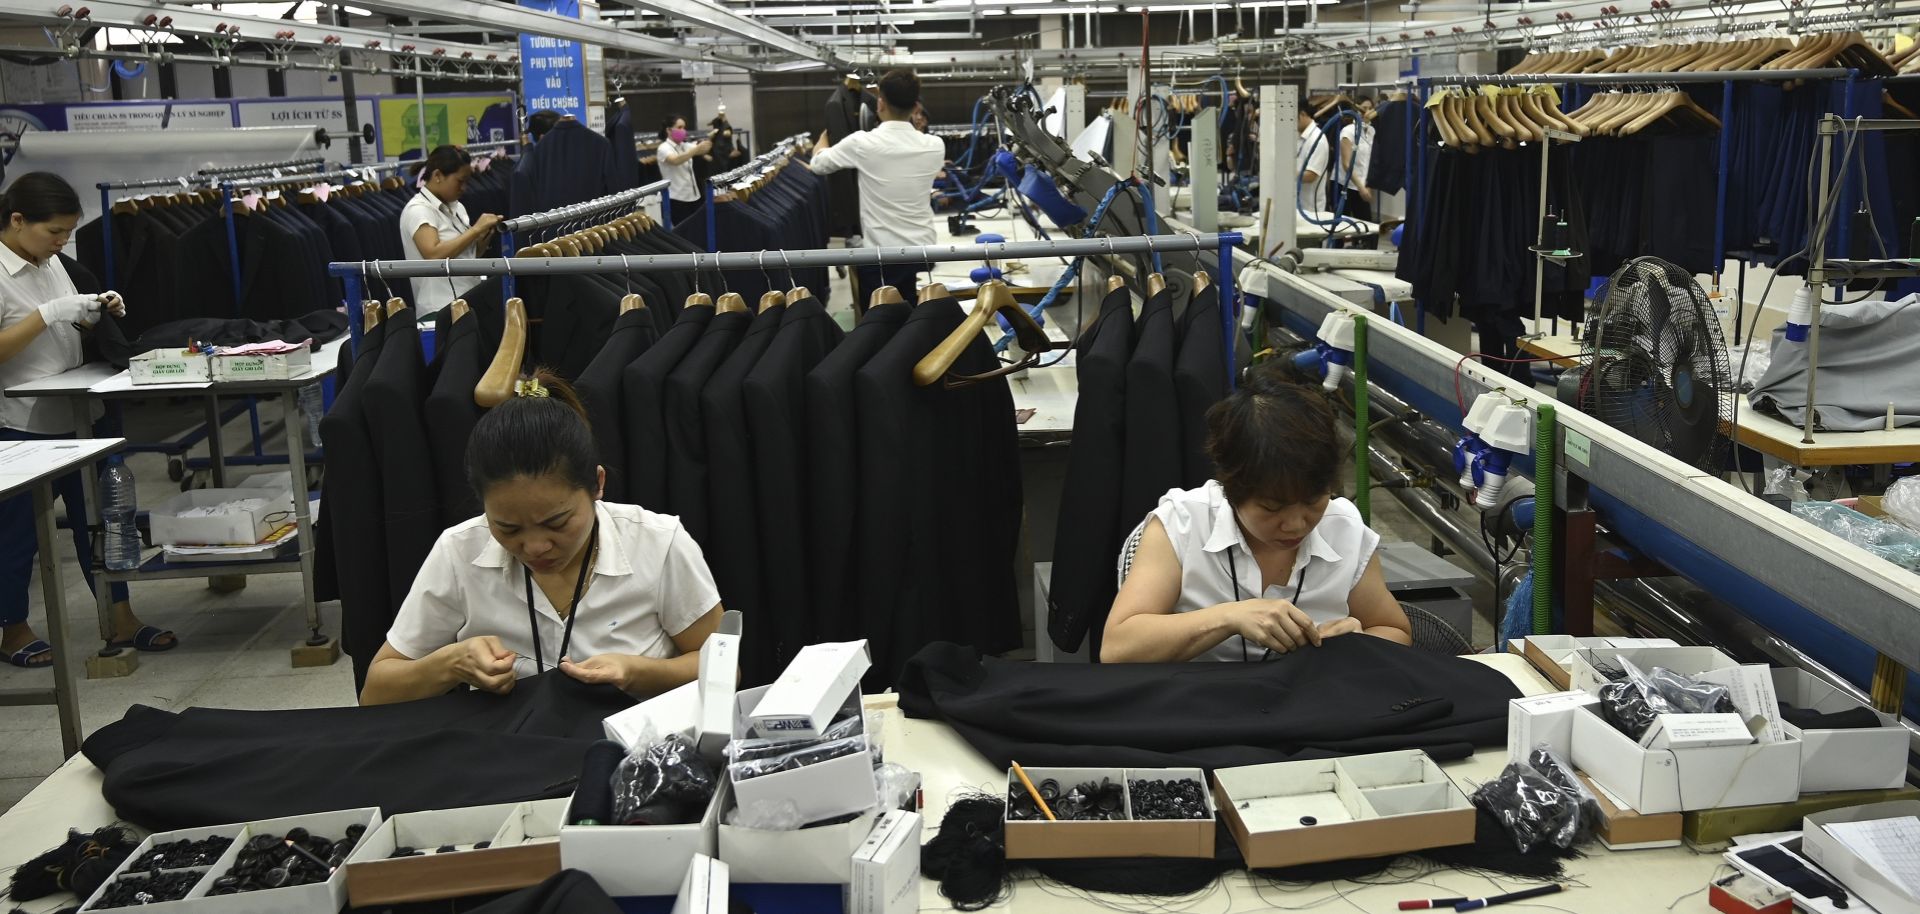 This May 24, 2019, photograph shows garment workers making men's suits in a factory in Hanoi, Vietnam.